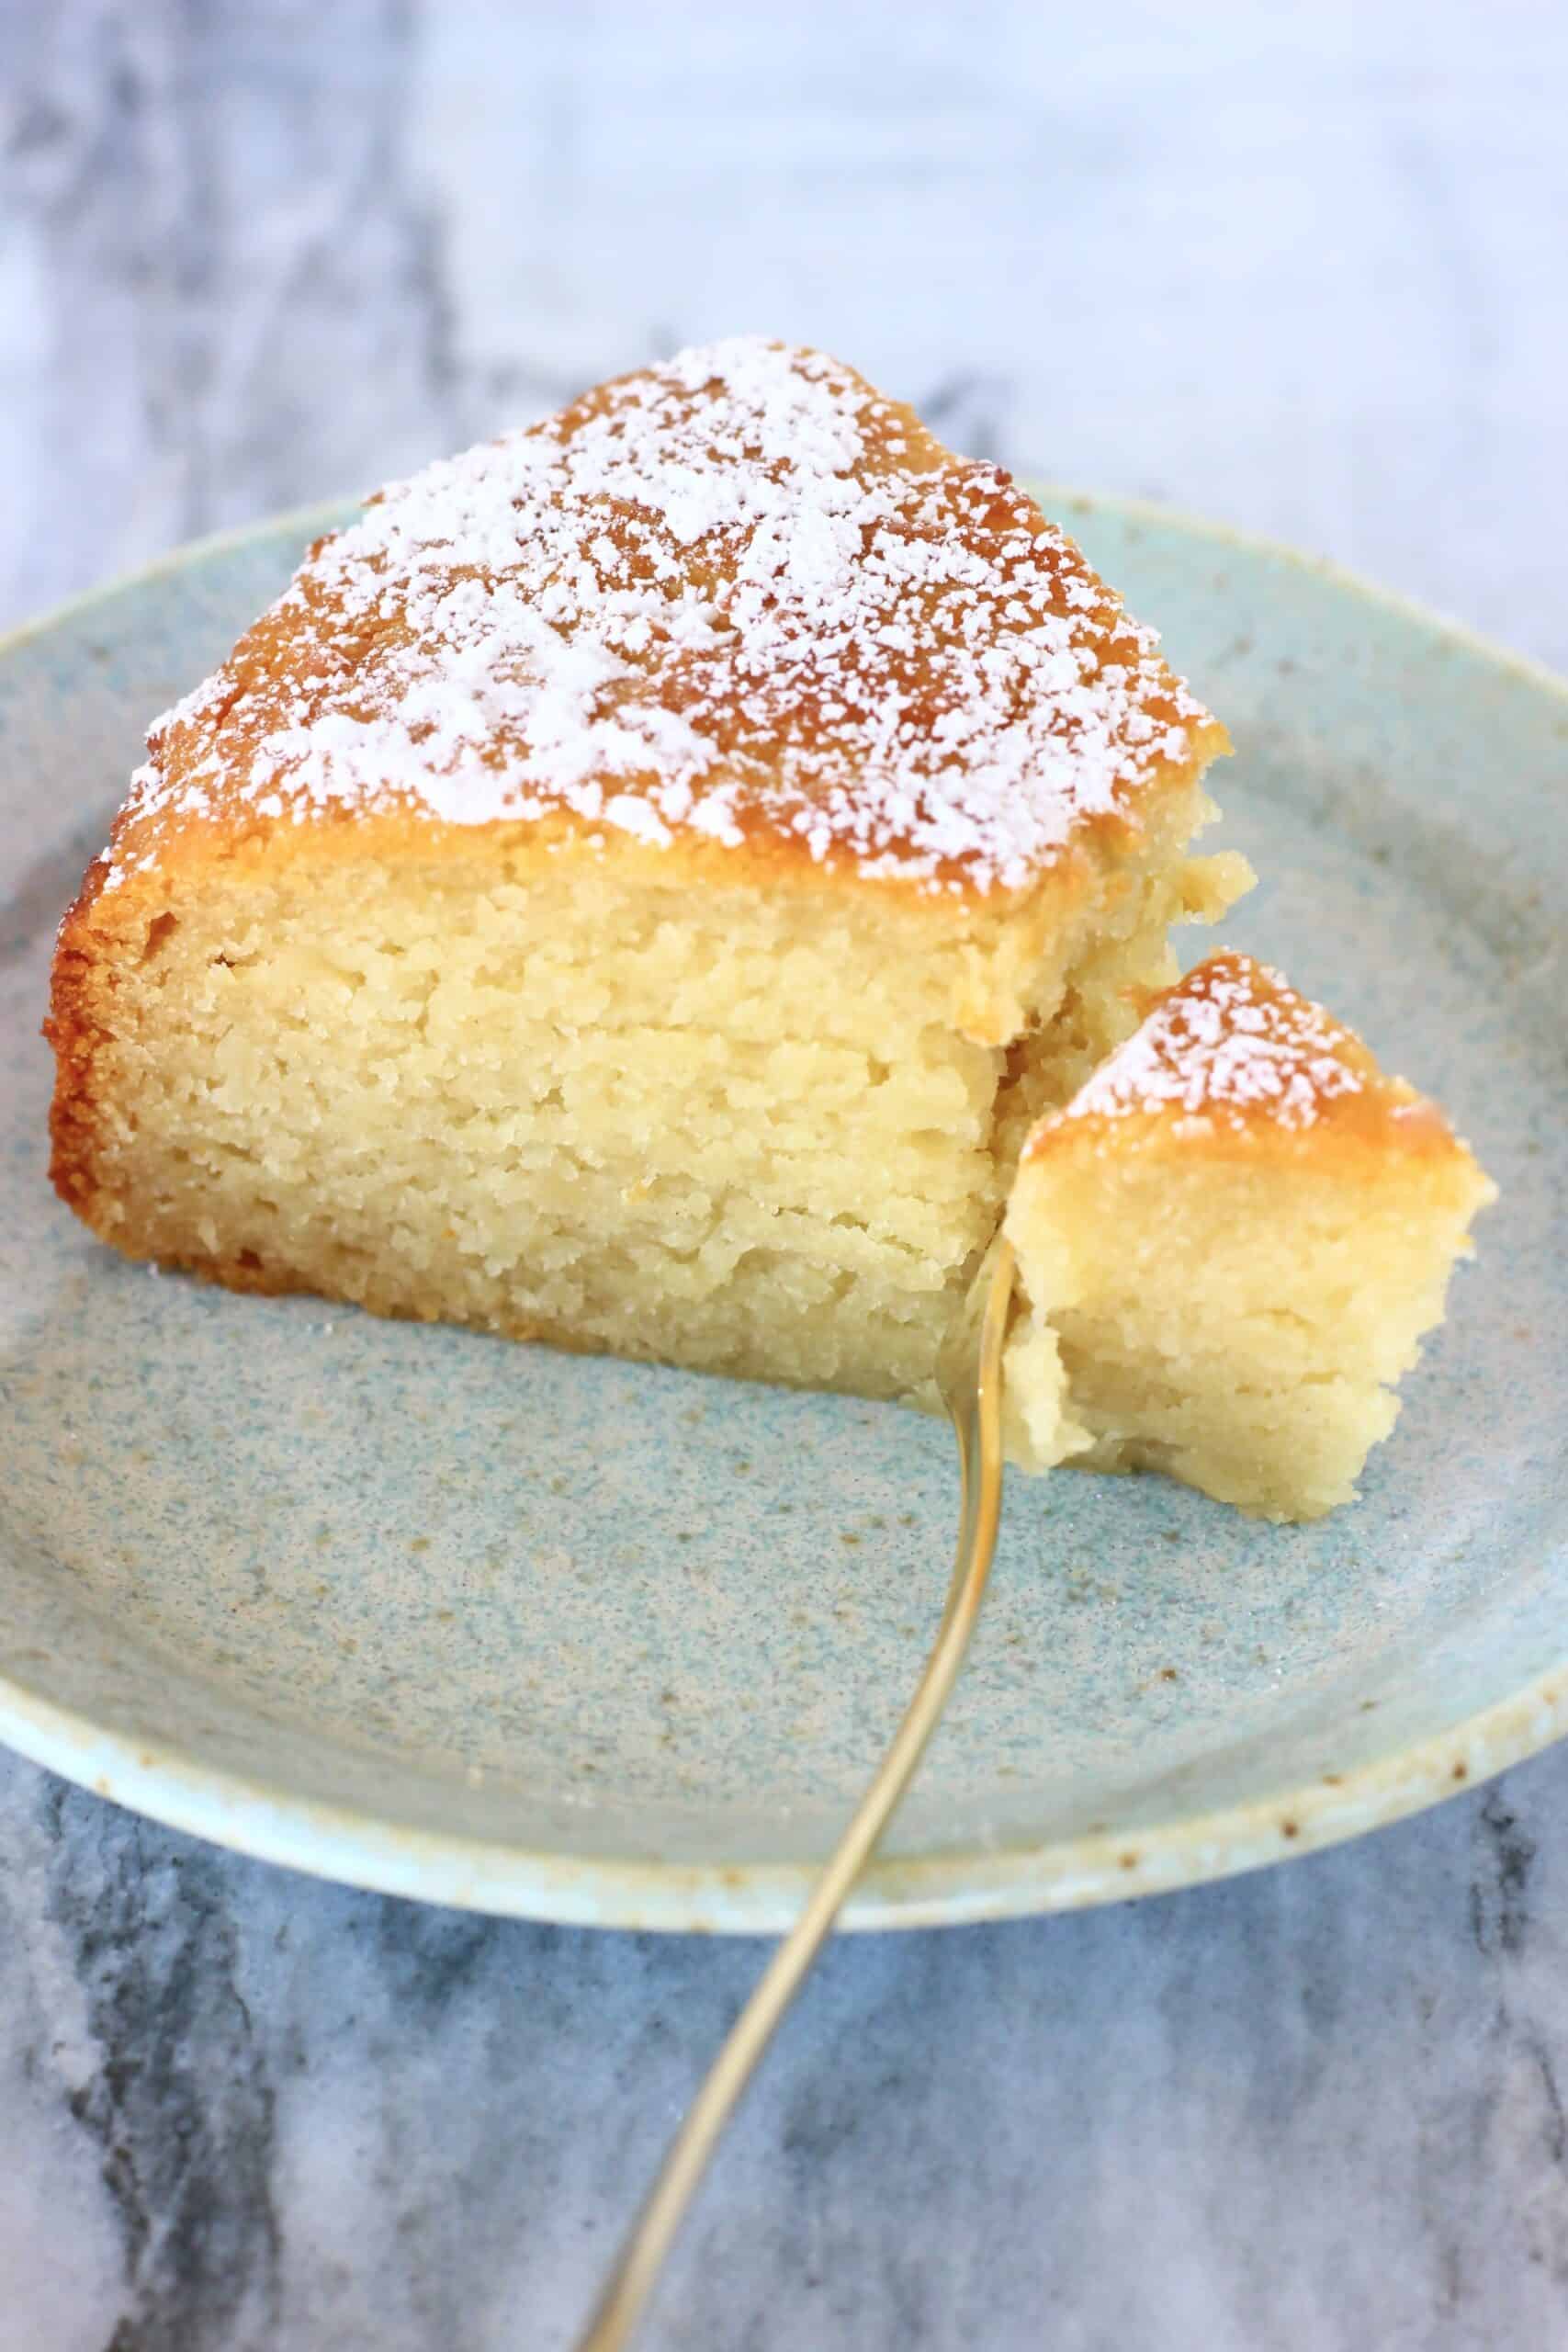 A slice of gluten-free vegan yogurt cake on a plate with a fork taking a bite out of it